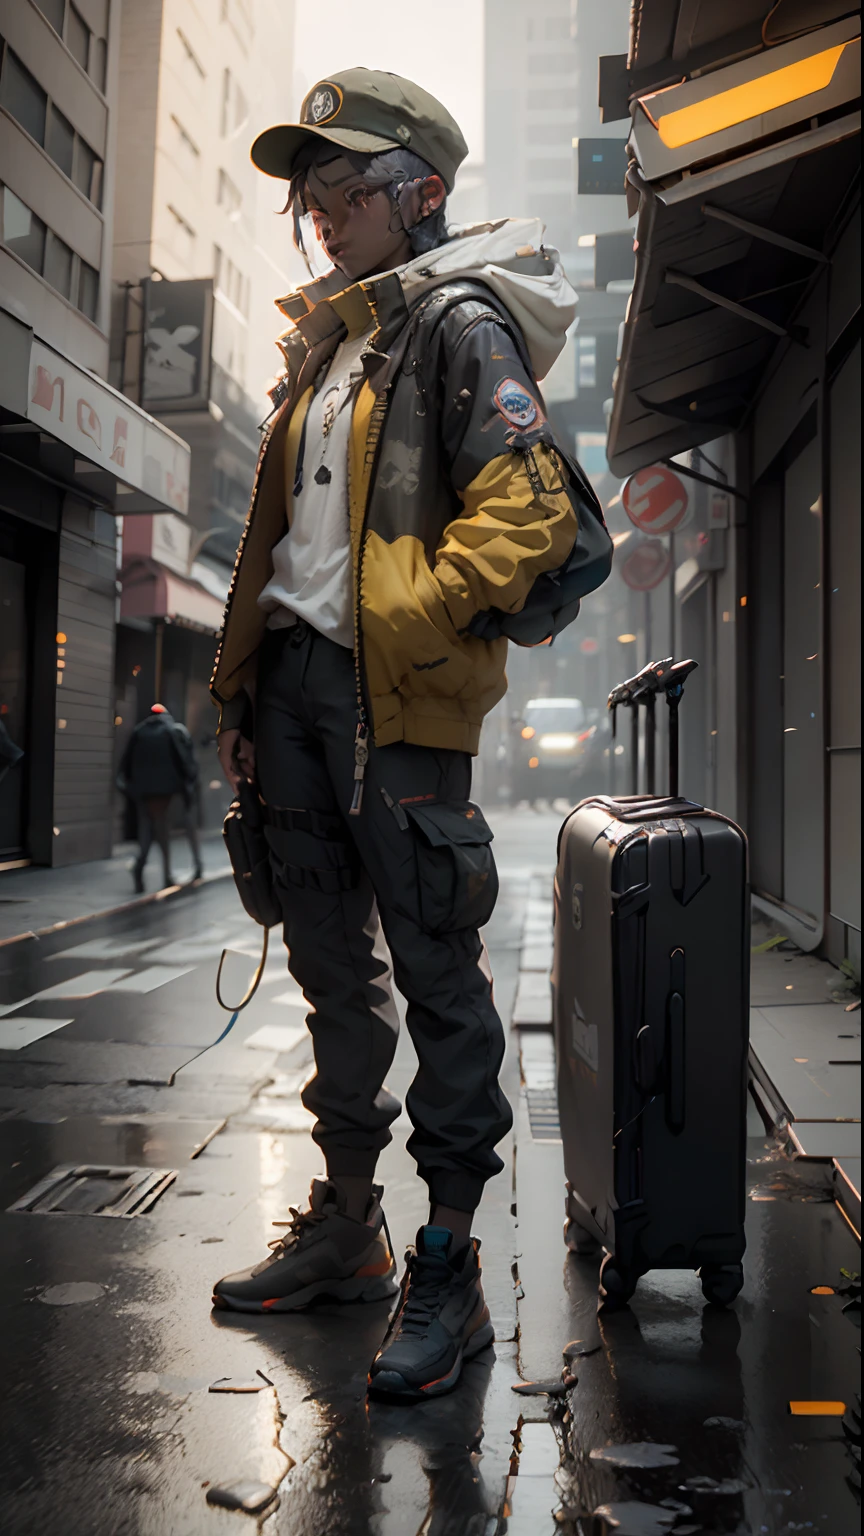 ((Best quality)), ((masterpiece)), 3D, cyberpunk guy with cap and tech wear, nijiloraeagle, khaki jacket, khaki cargo pants, HDR (high dynamic range), NVIDIA RTX, super resolution, unreal 5, Subsurface Dispersion, PBR Texturing, Post Processing, Anisotropic Filtering, Depth of Field, Accurate Light-Material Interaction Simulation, Perfect Proportions, Octane Render, Two-Tone Lighting, Low ISO, 8K RAW,